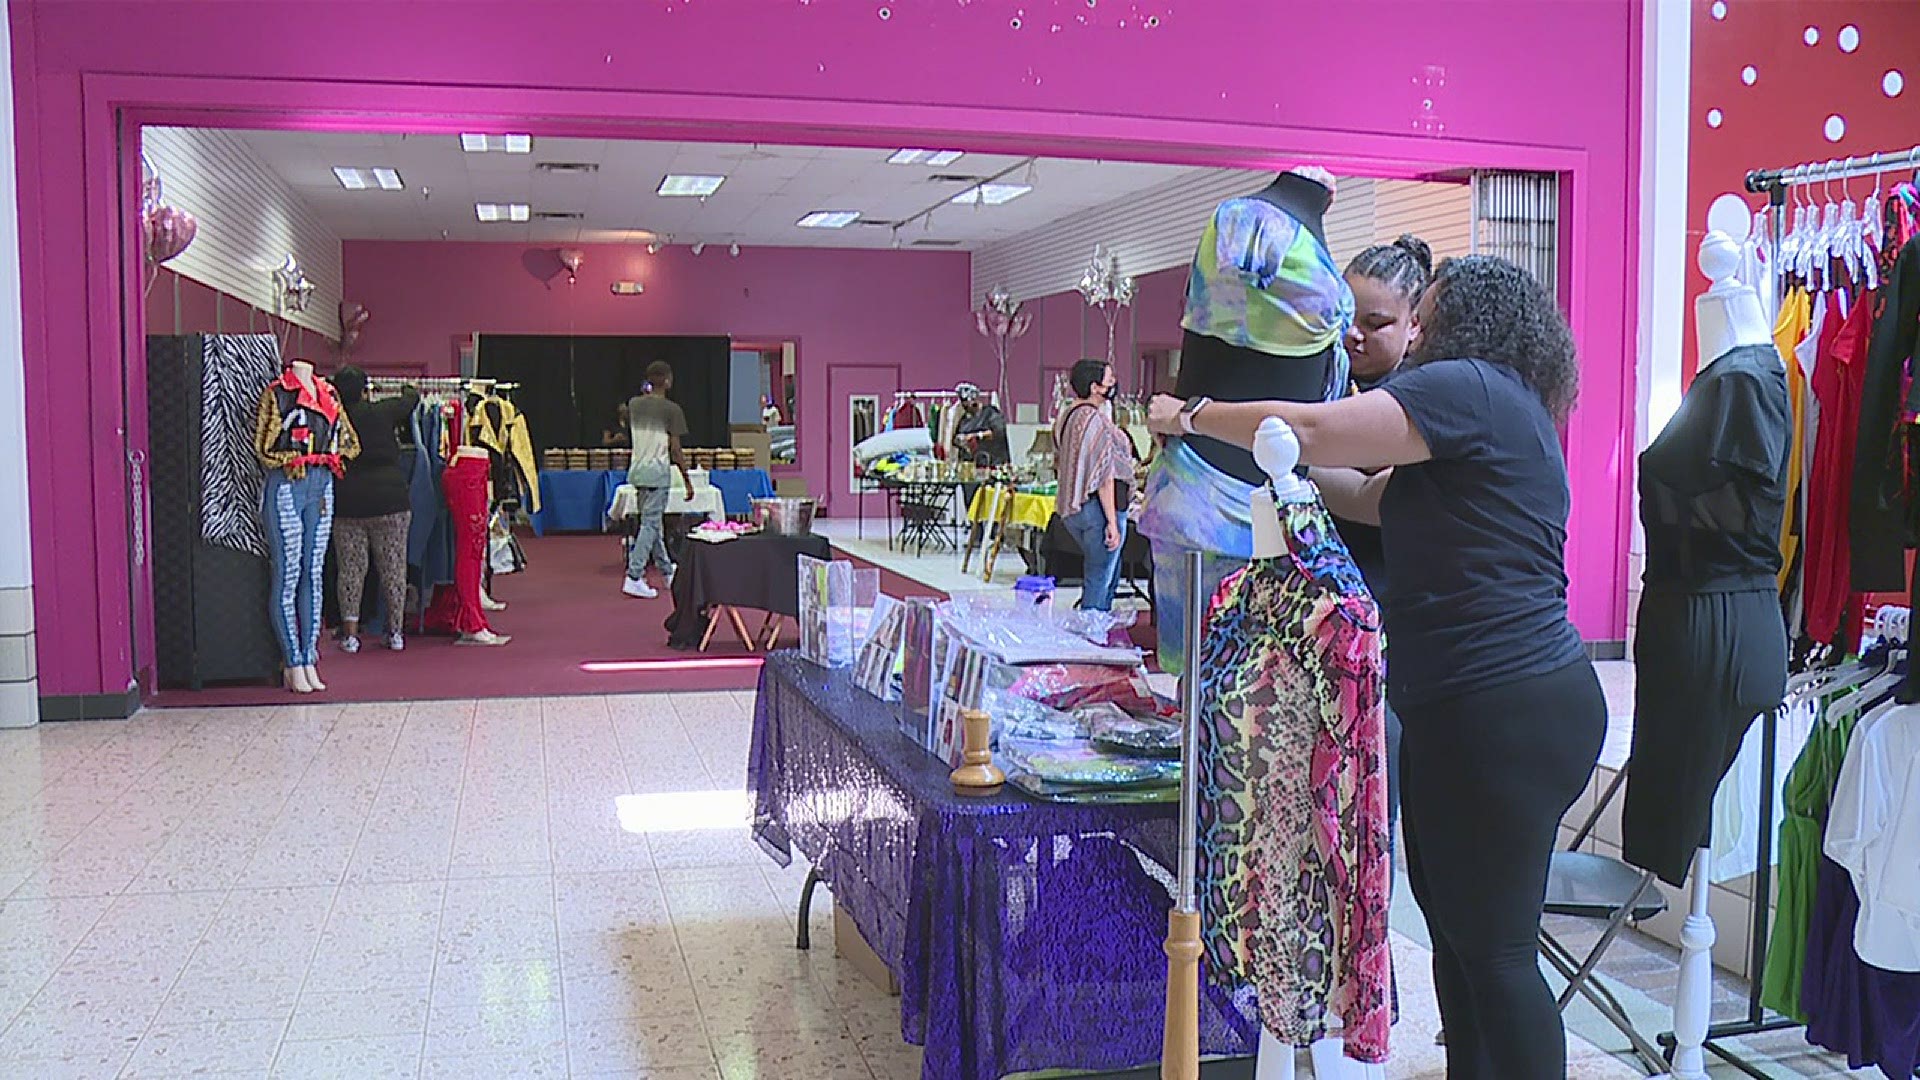 The local non-profit is renting out a space in NorthPark Mall for local businesses to set up booths and sell their products.